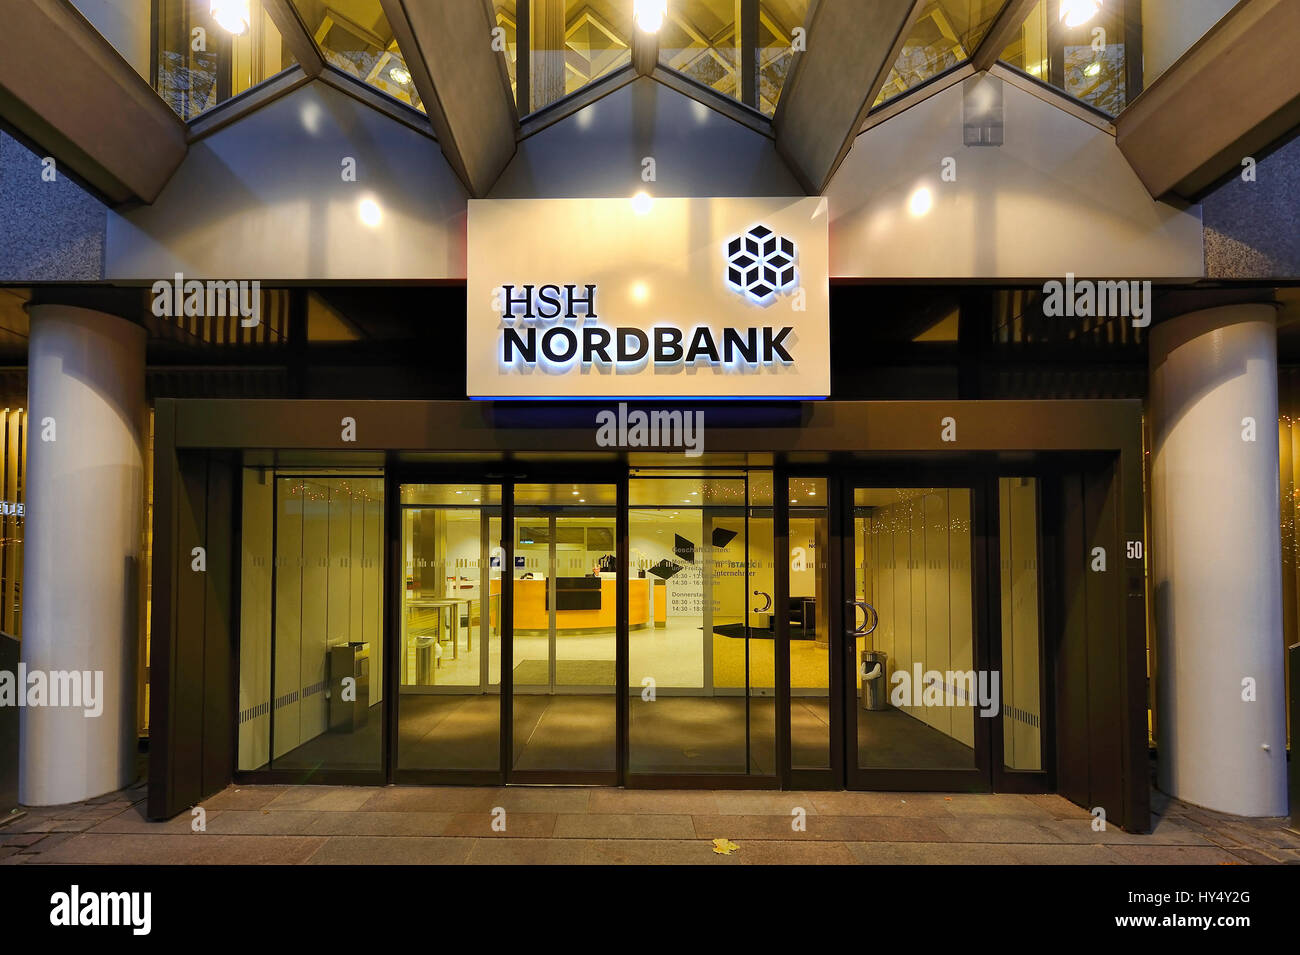 Entrance to the north bank HSH on the Gerhart captain's place in Hamburg, Germany, Europe, Eingang zur HSH Nordbank am Gerhart-Hauptmann-Platz in Hamb Stock Photo